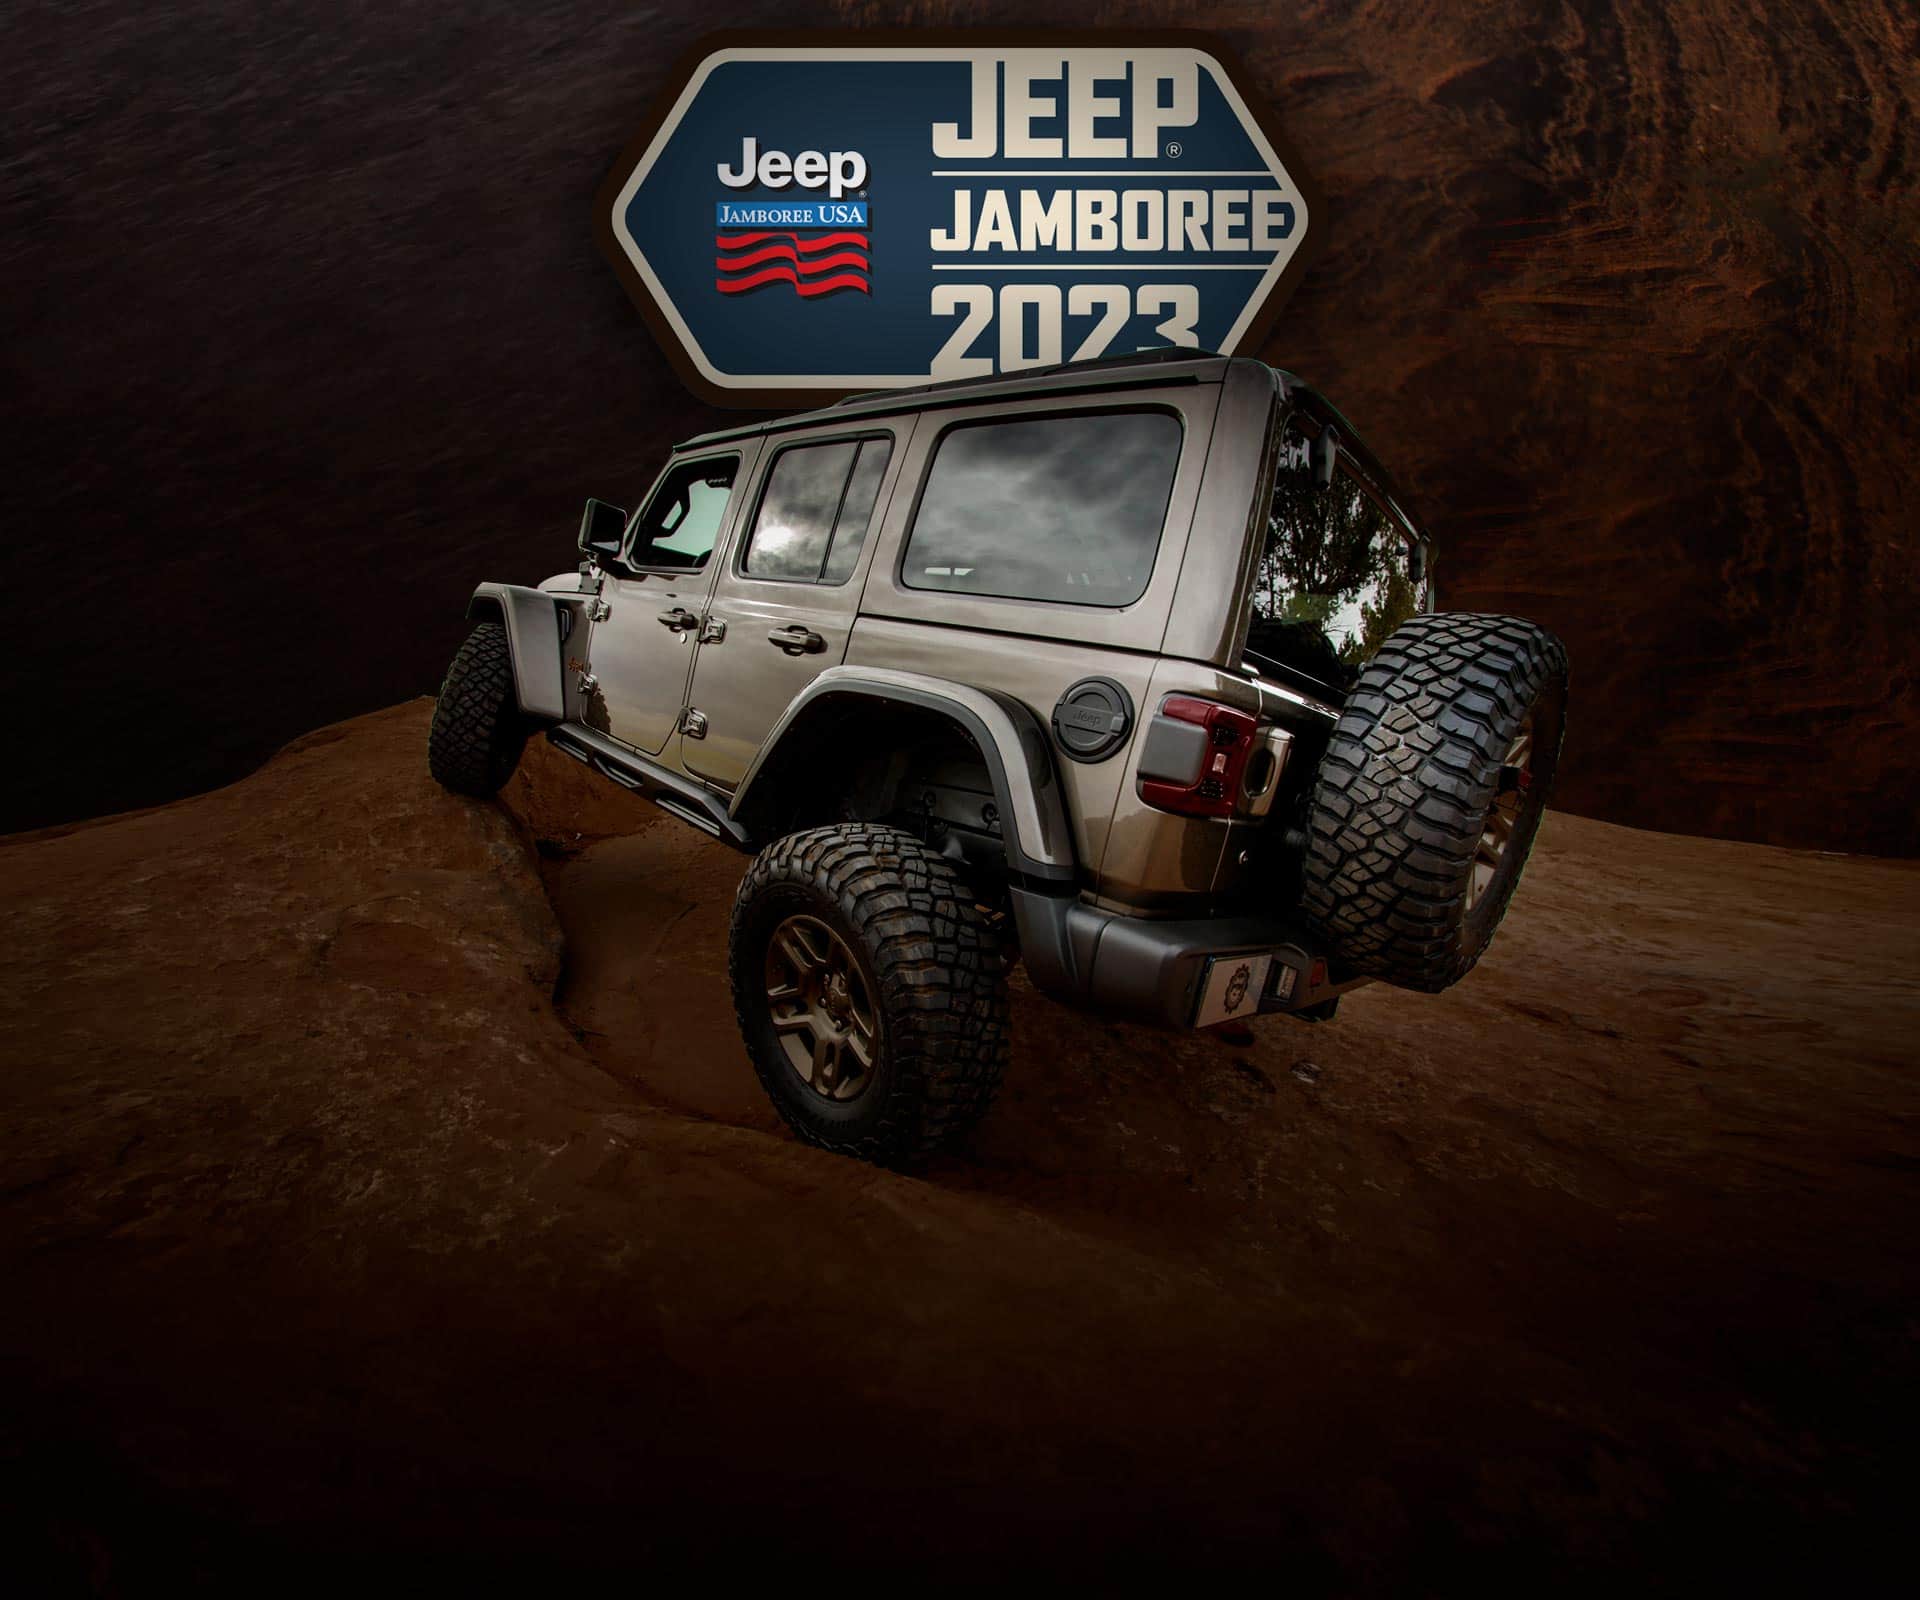 Jeep Jamboree USA. Jeep Jamboree 2023. A Jeep Wrangler Unlimited crawling over an uneven rocky surface.